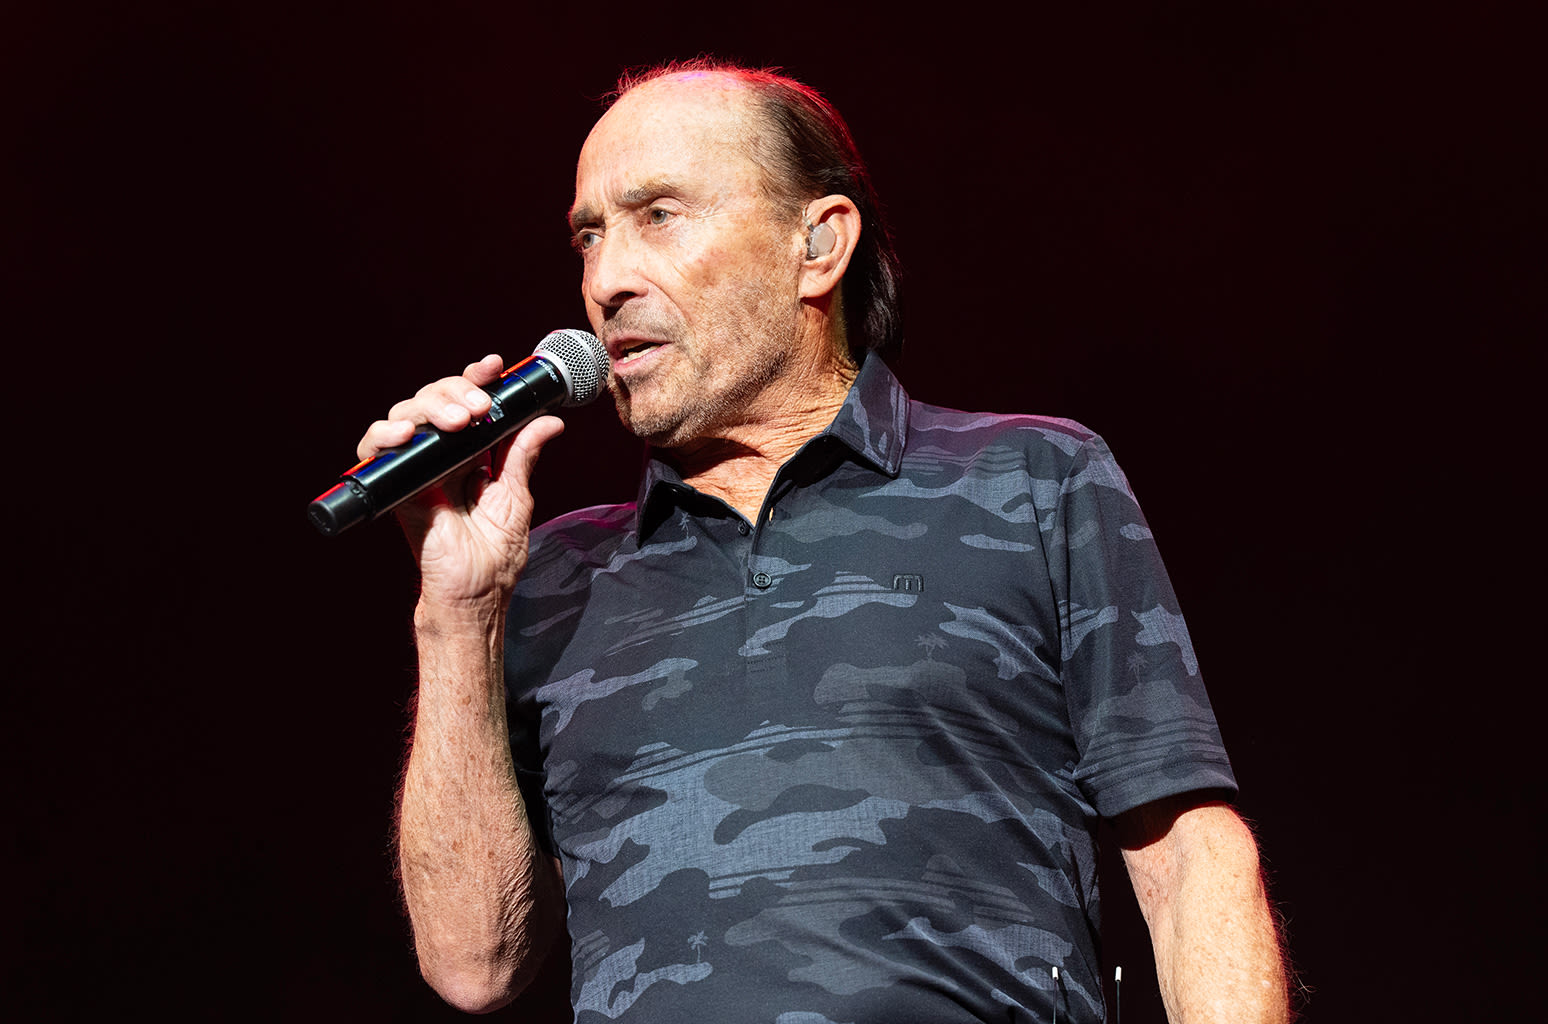 Lee Greenwood, Chris Janson to Make Appearances During Republican National Convention